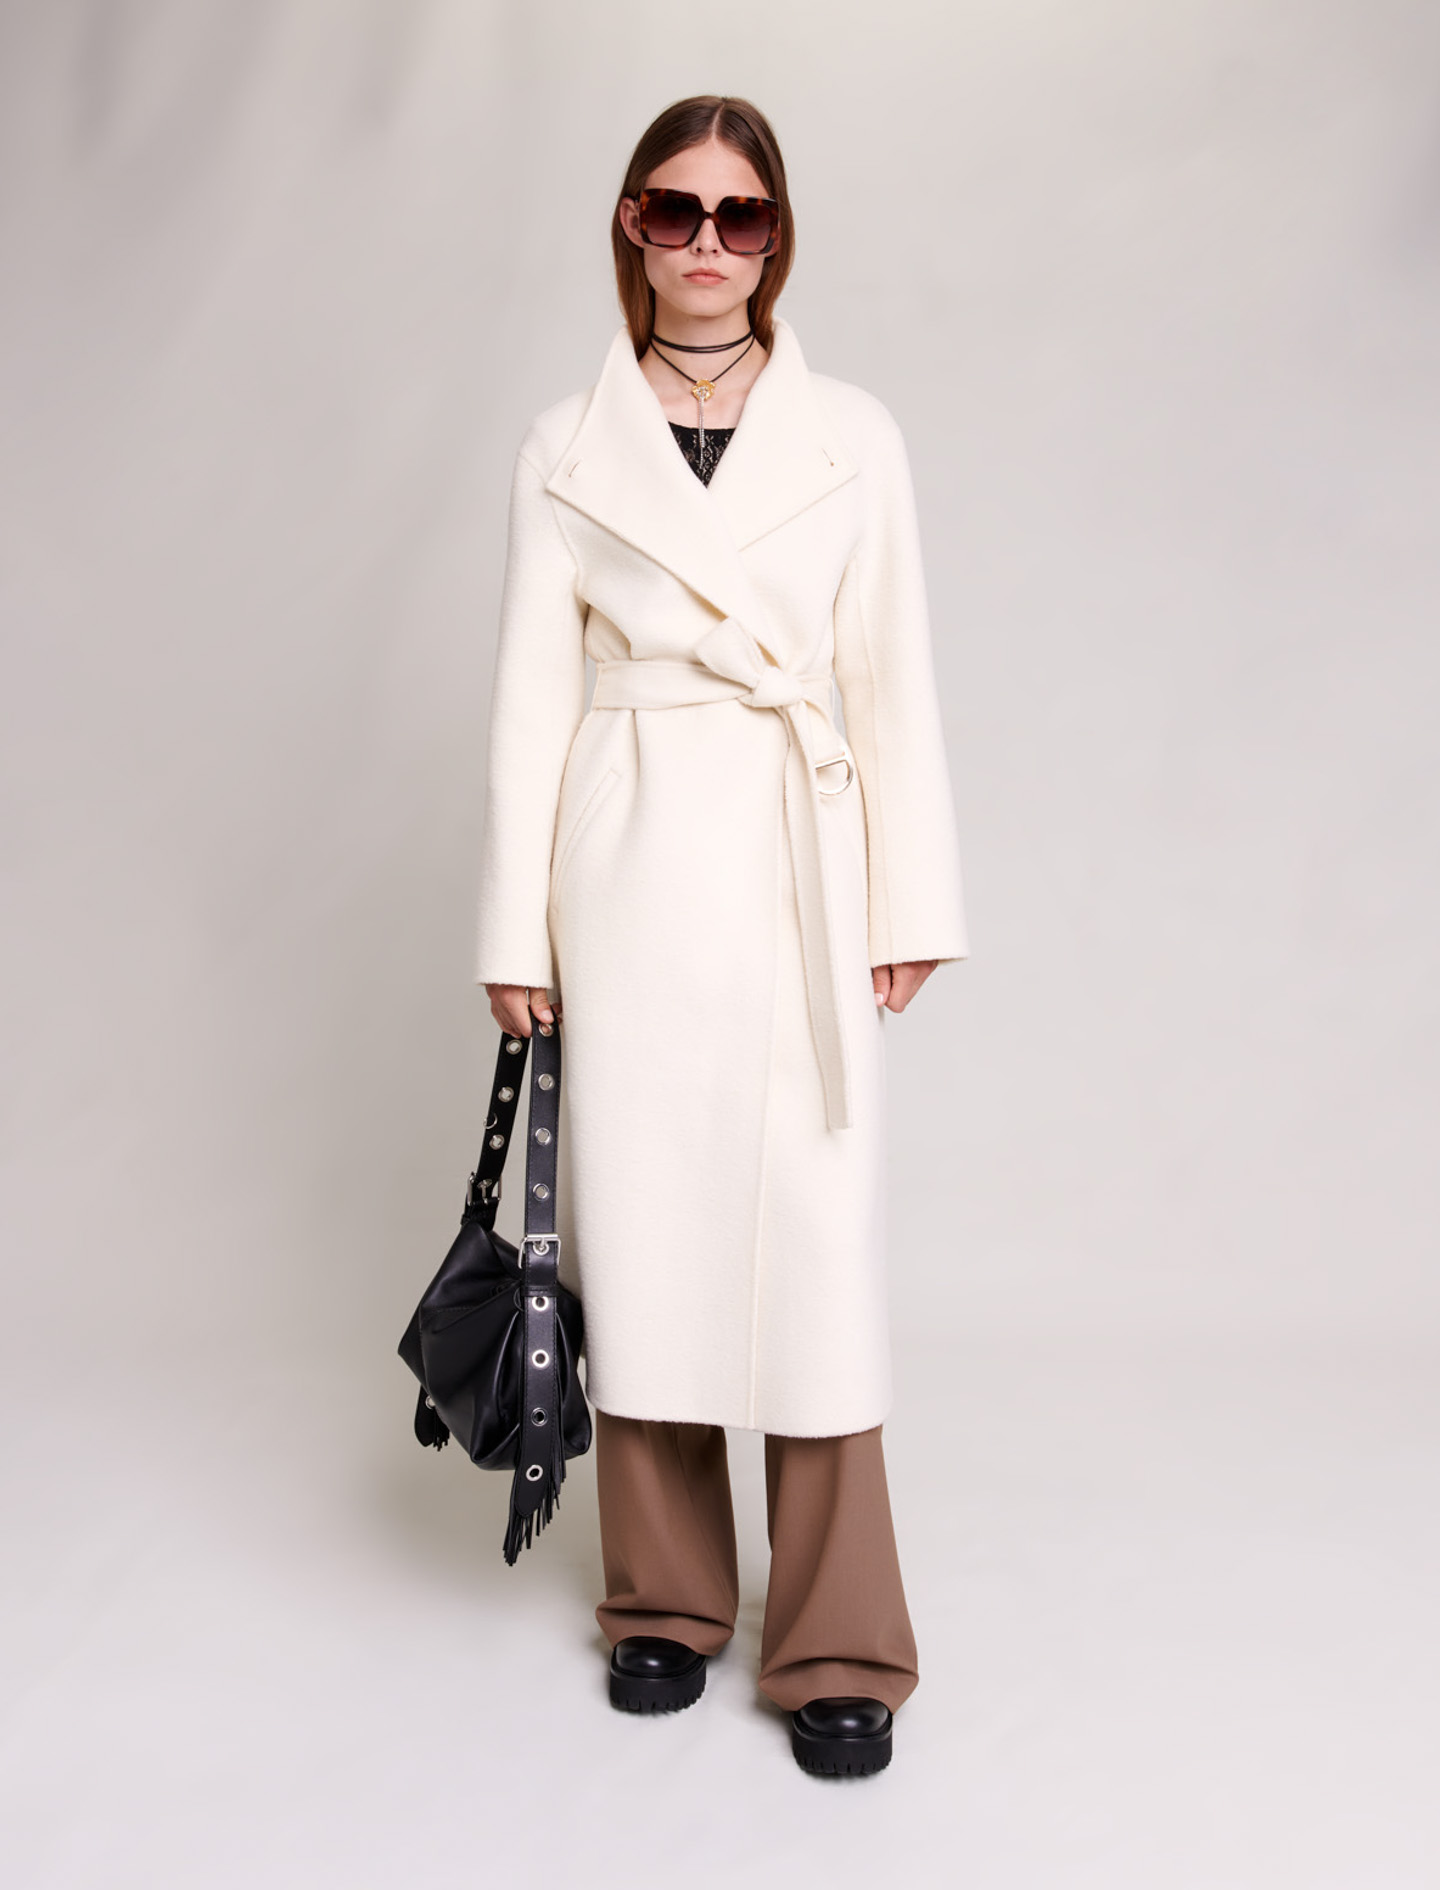 Maje Woman's wool, Mid-length coat with tie fastening for Fall/Winter, in color Ecru / Beige